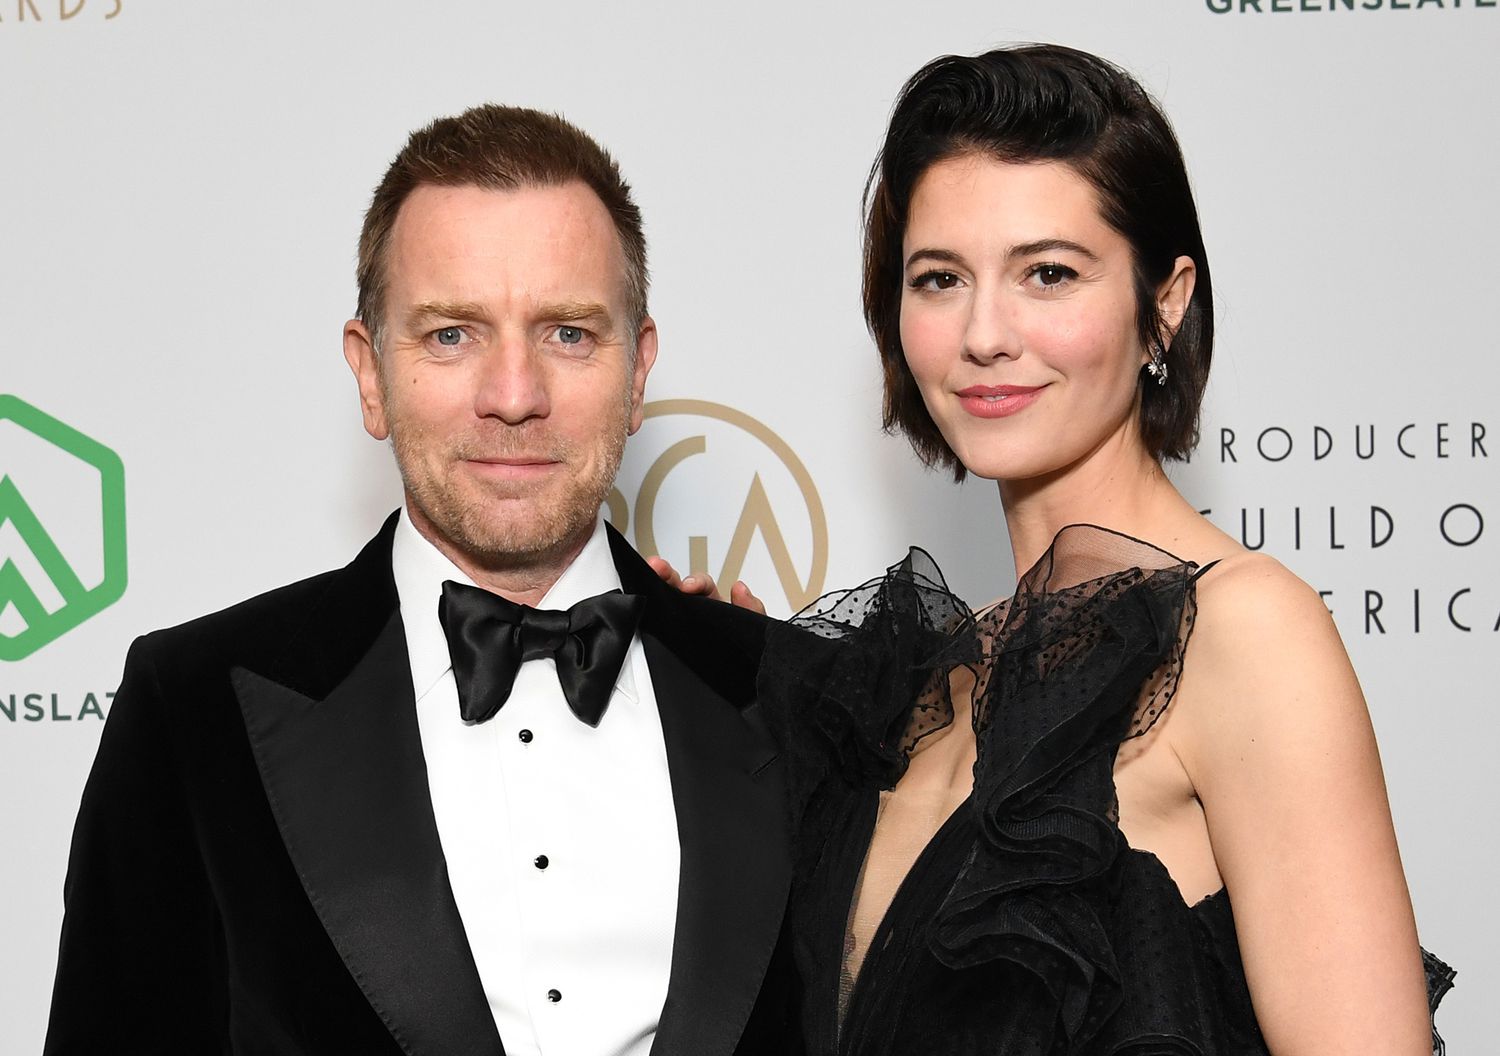 Ewan McGregor and Mary Elizabeth Winstead attend The 33rd Producers Guild Awards Supported By GreenSlate at Fairmont Century Plaza on March 19, 2022 in Los Angeles, California